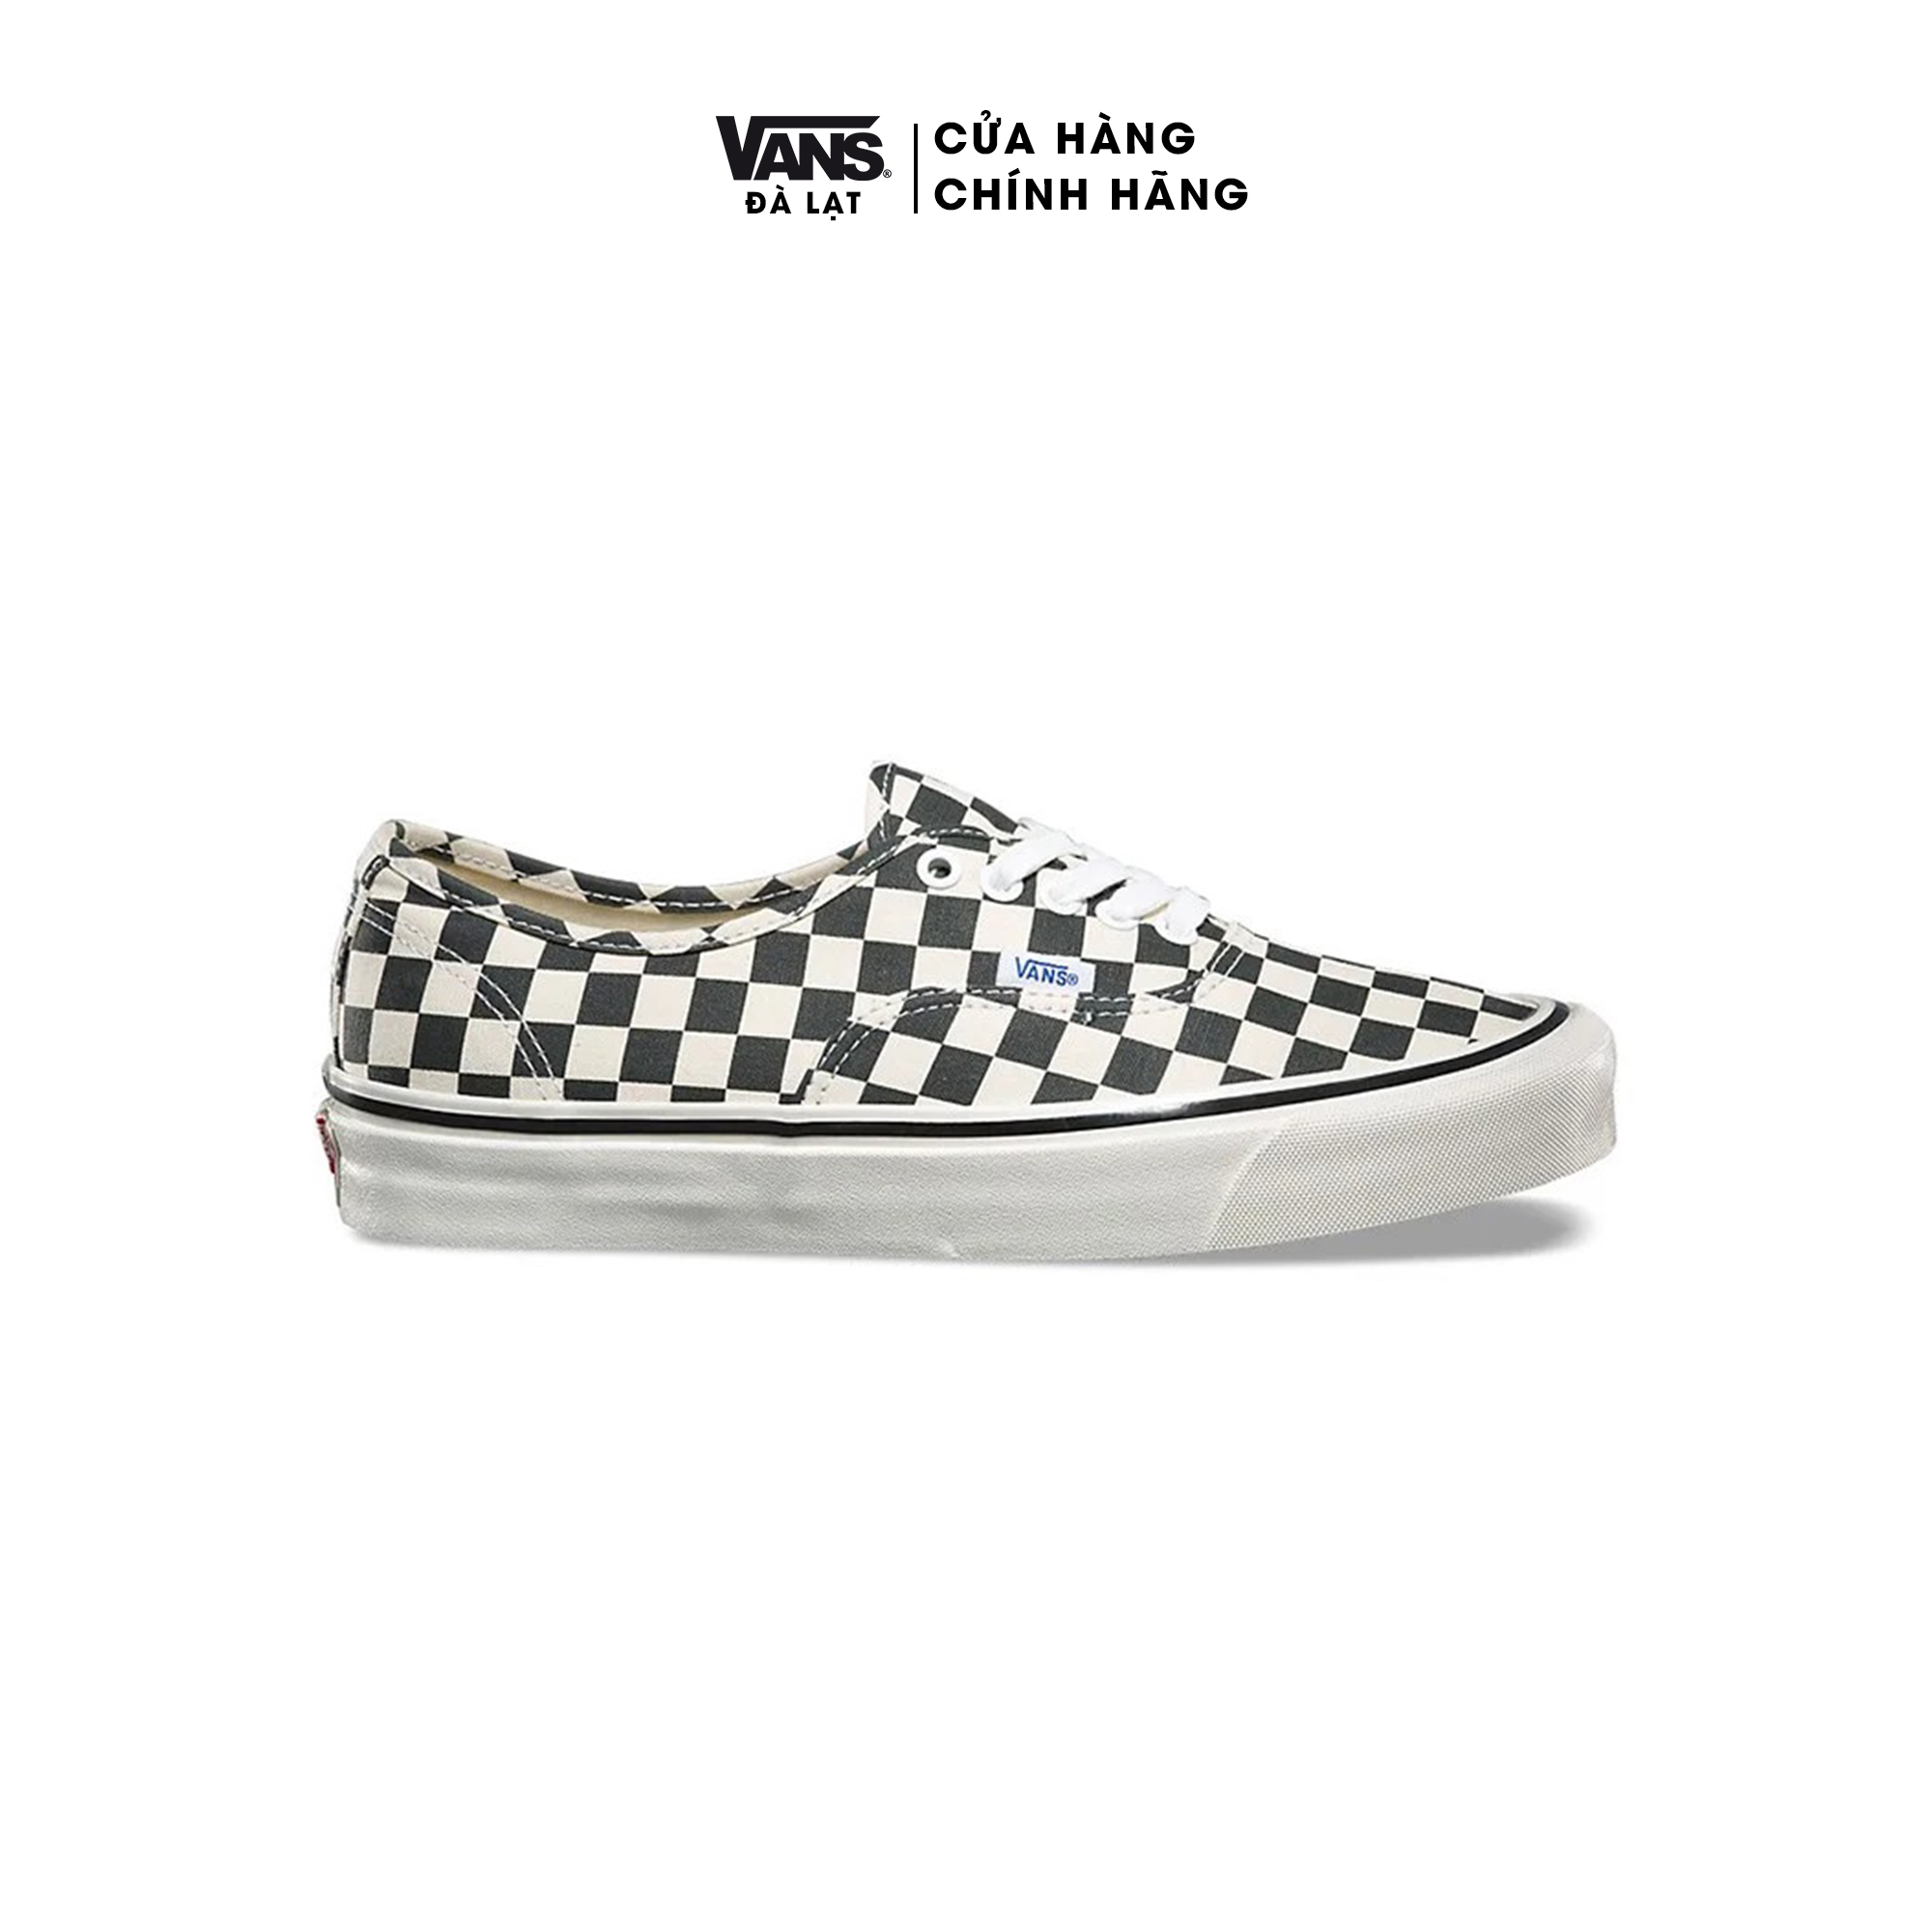 Giày Sneakers Unisex Vans caro Authentic 44 Dx Checkerbroad Anaheim Factory - VN0A38ENOAK